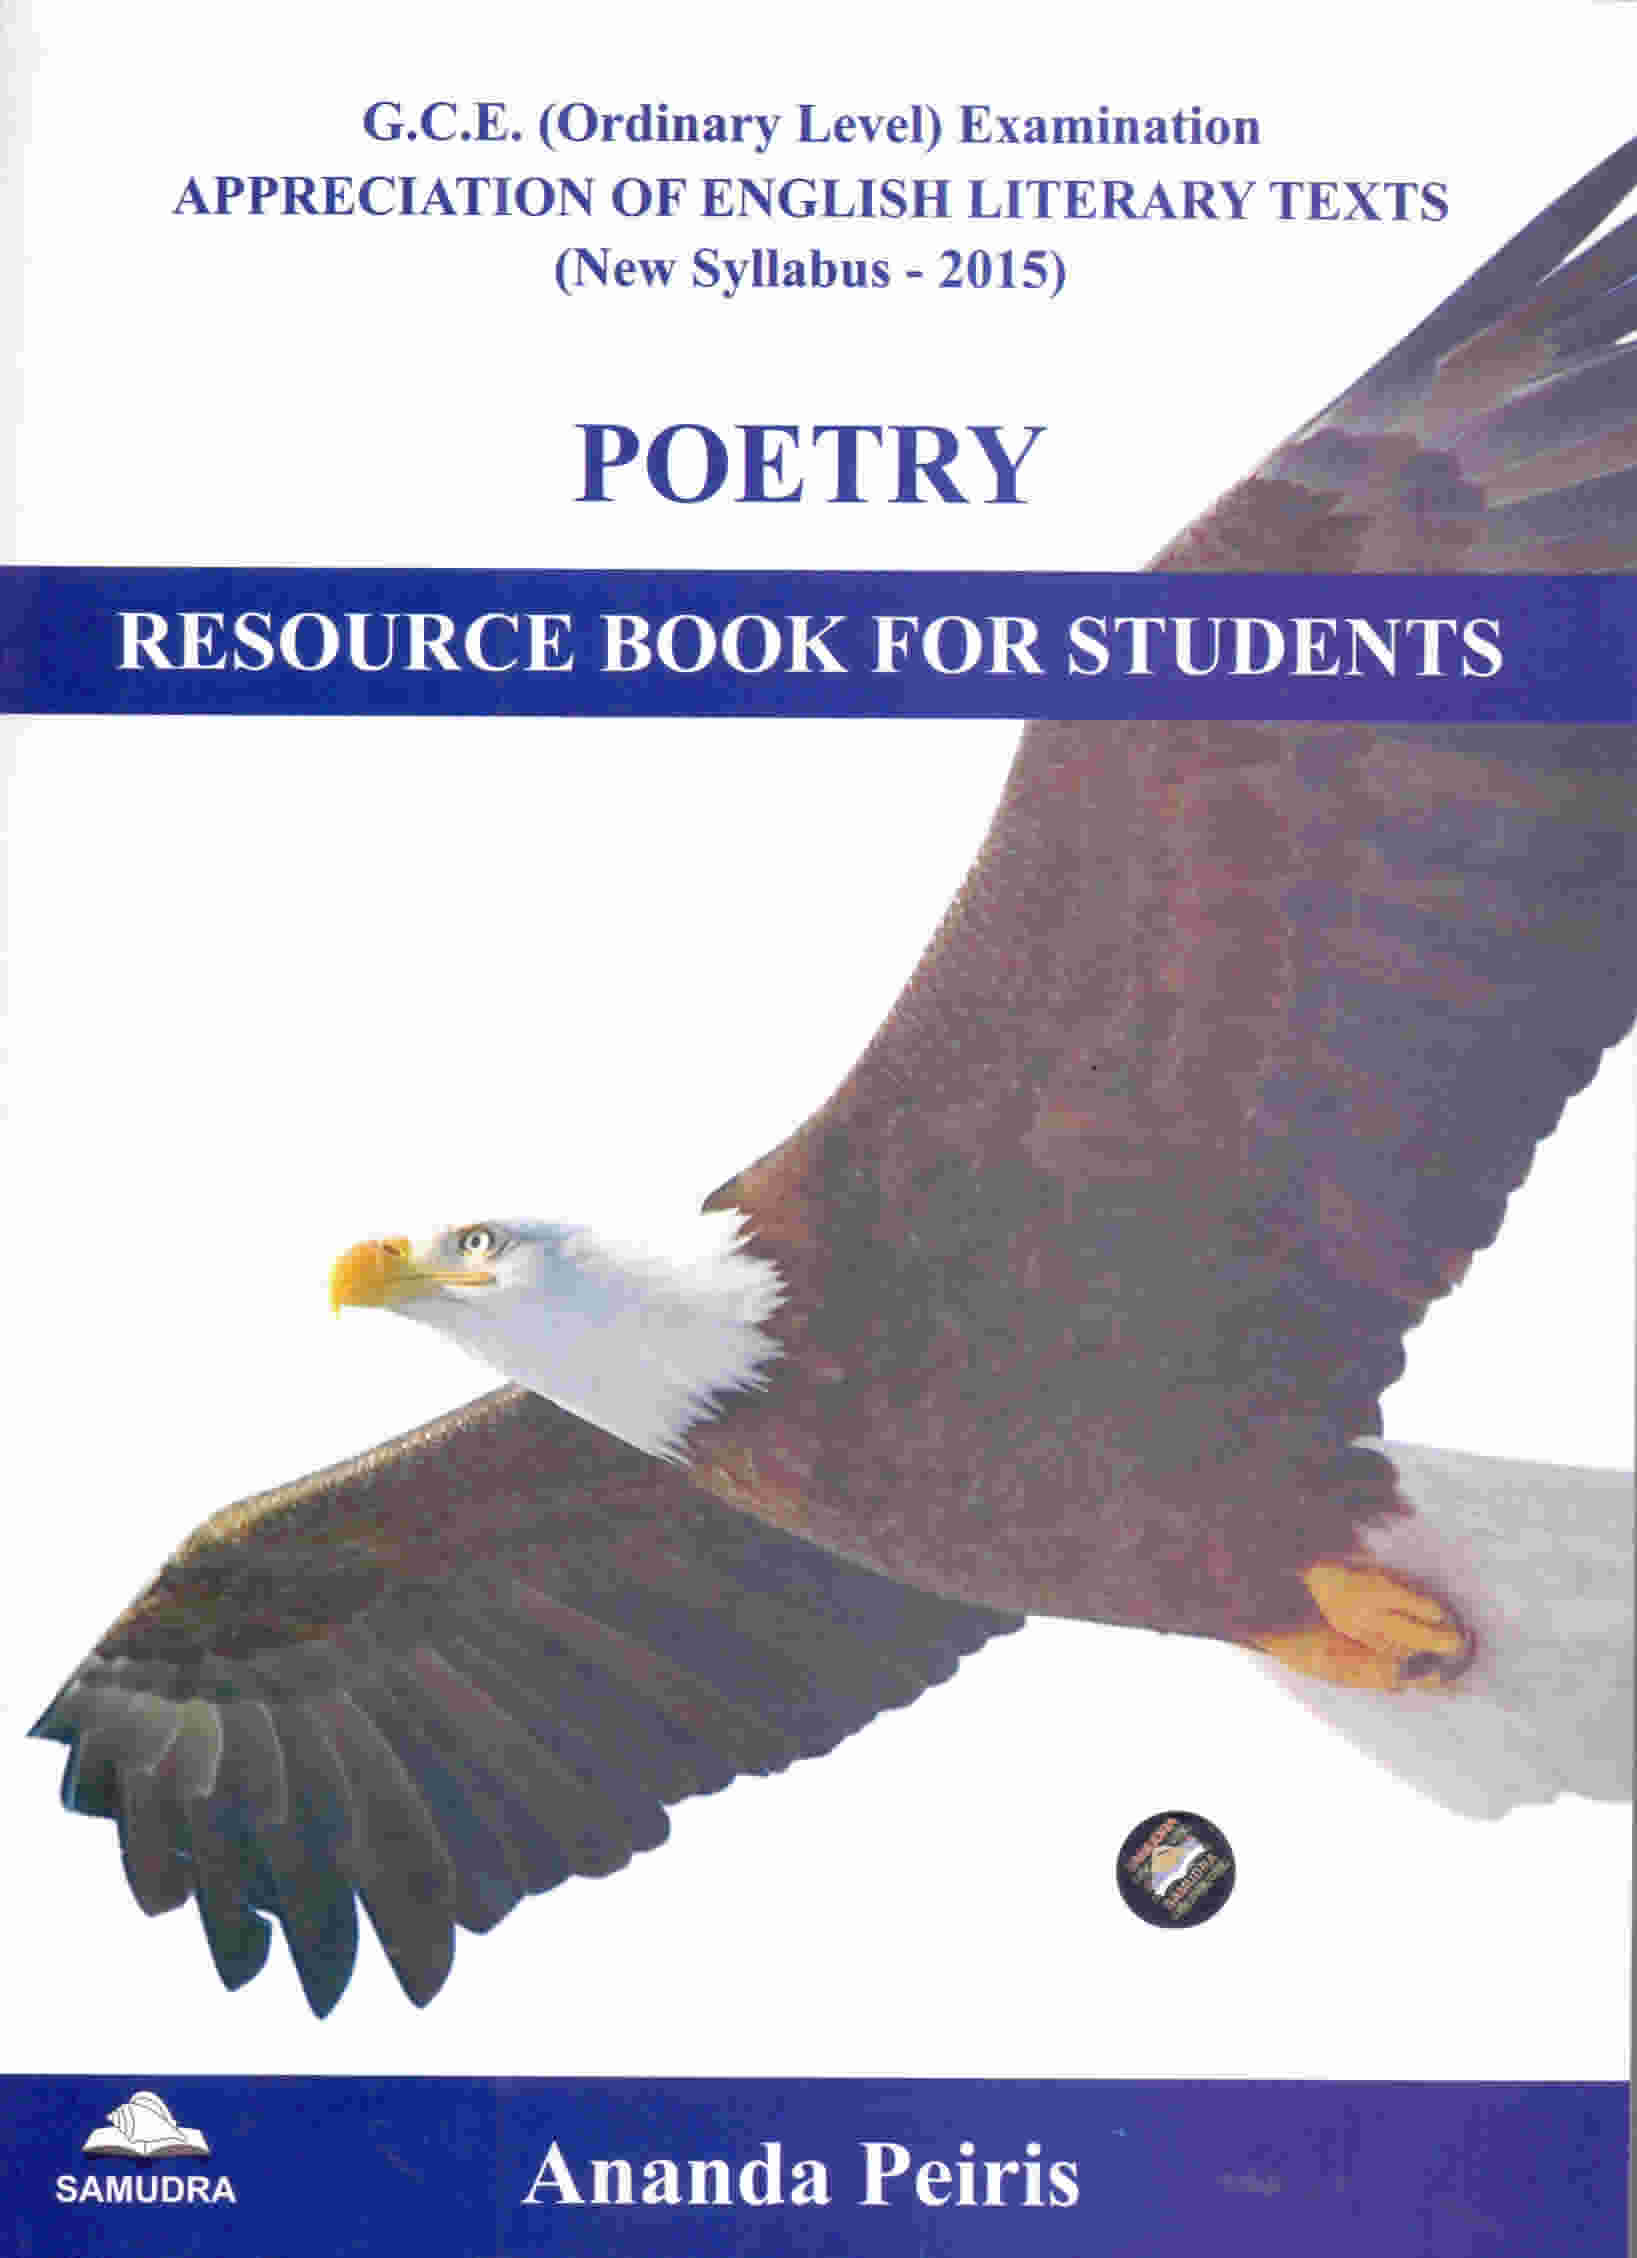 O/L Poetry Resource Book for Students ( New Syllabus 2015 )